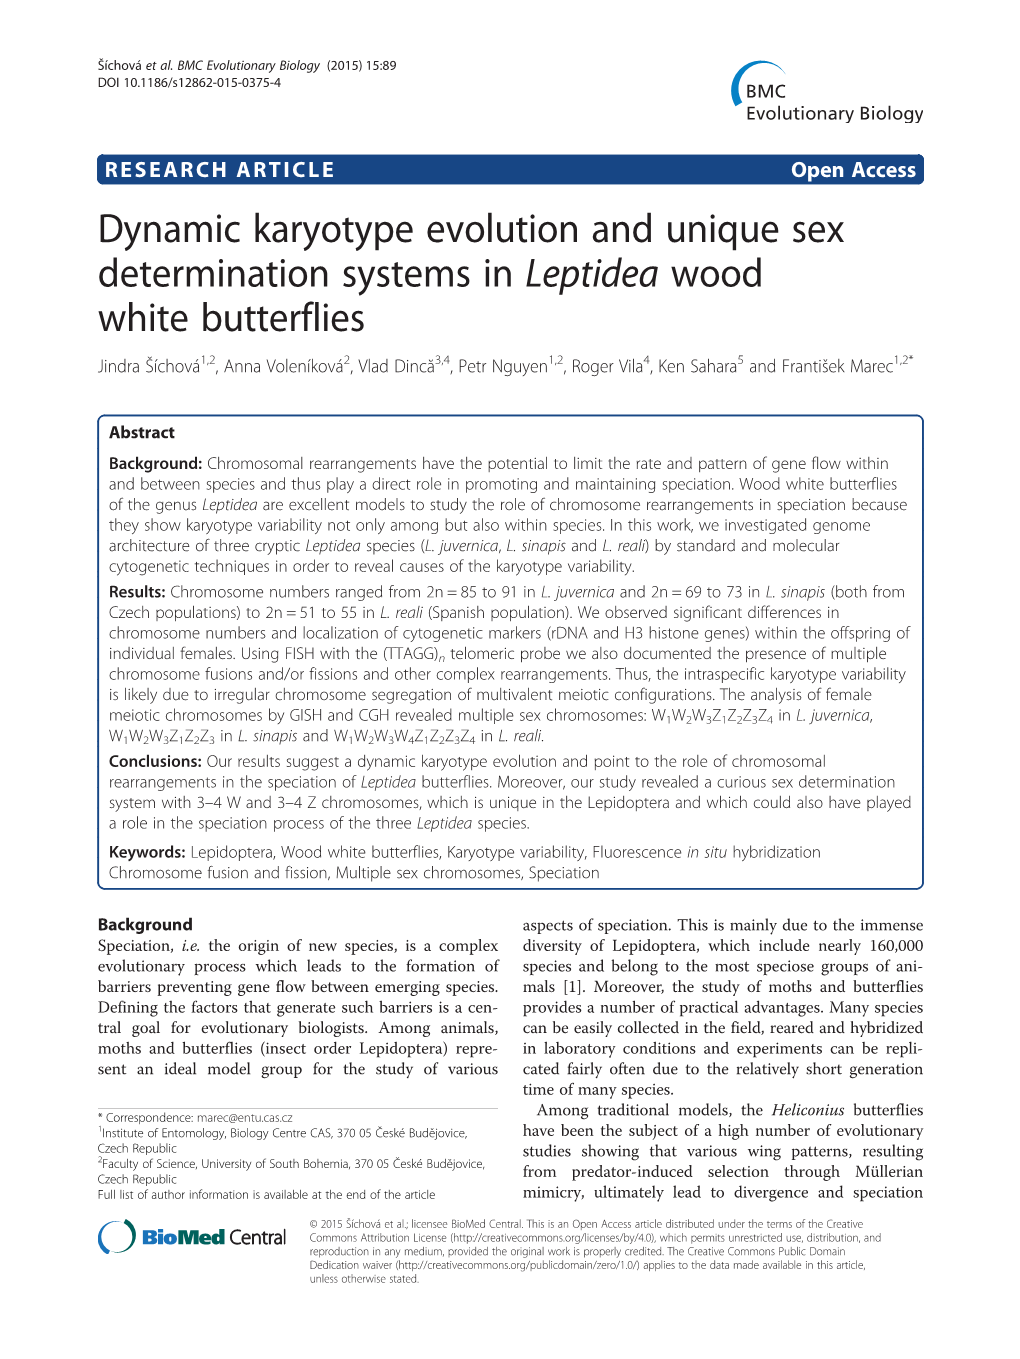 Dynamic Karyotype Evolution and Unique Sex Determination Systems